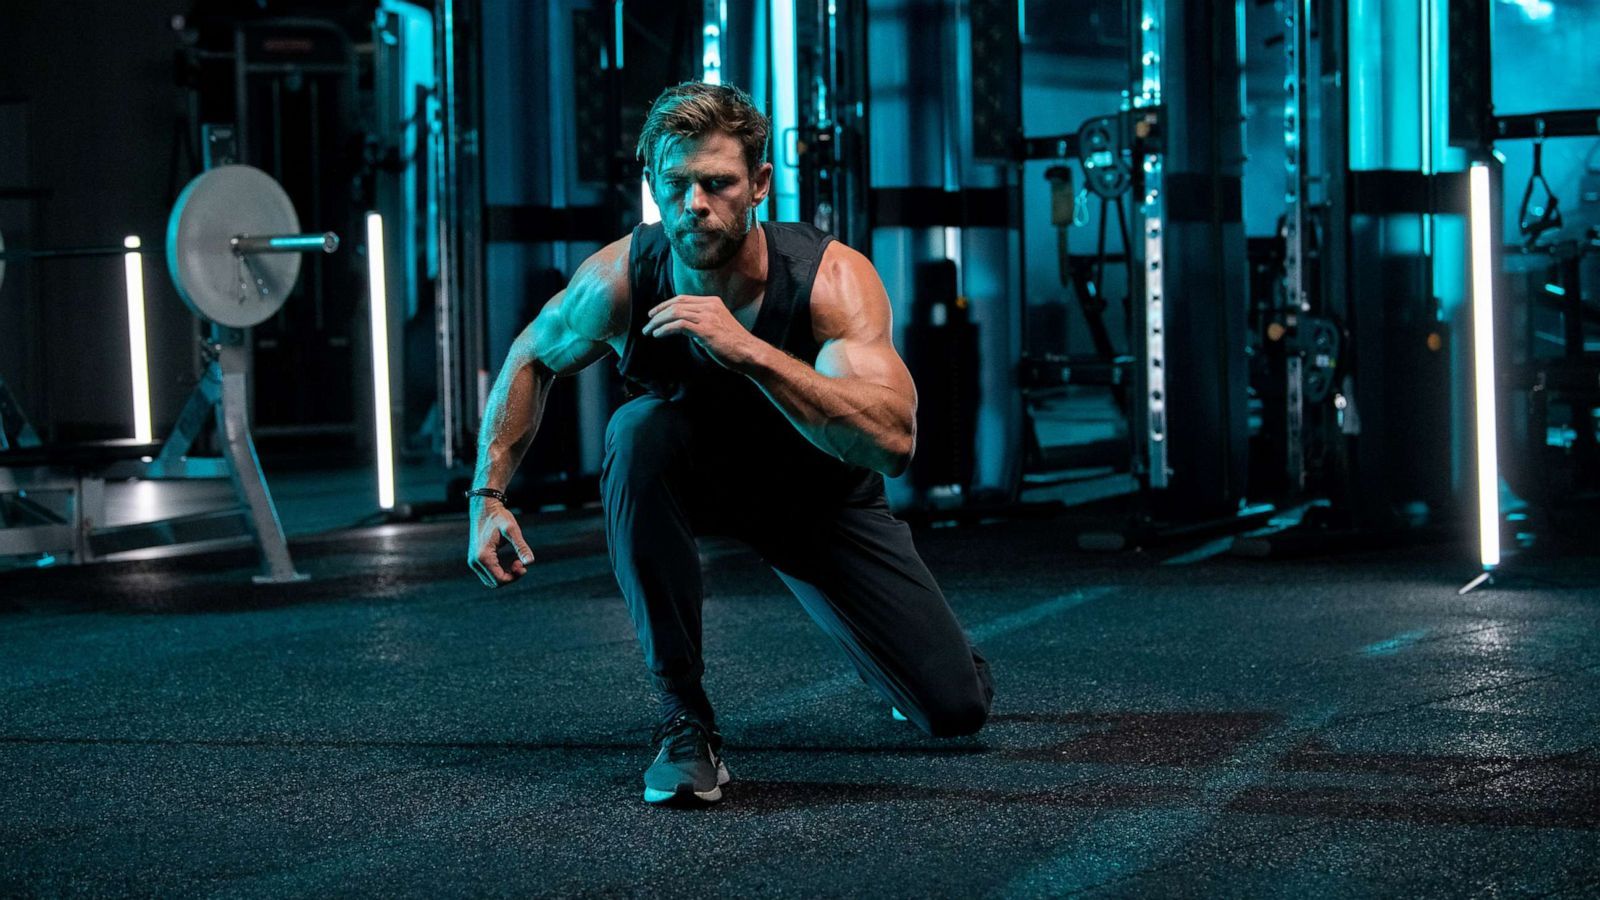 We worked out like Chris Hemsworth